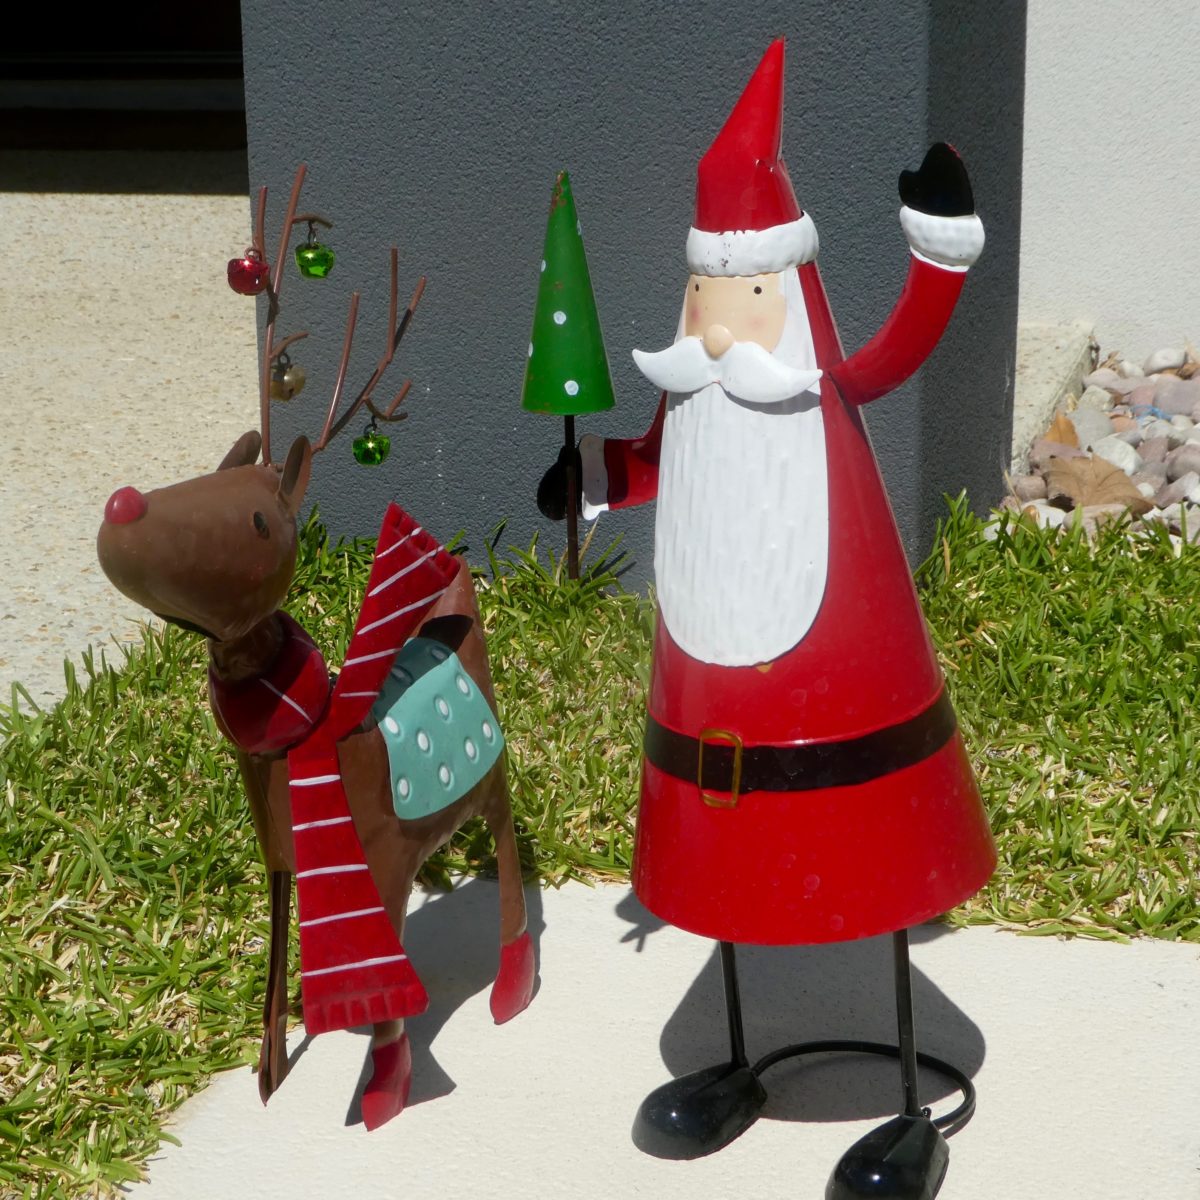 Christmas in Perth